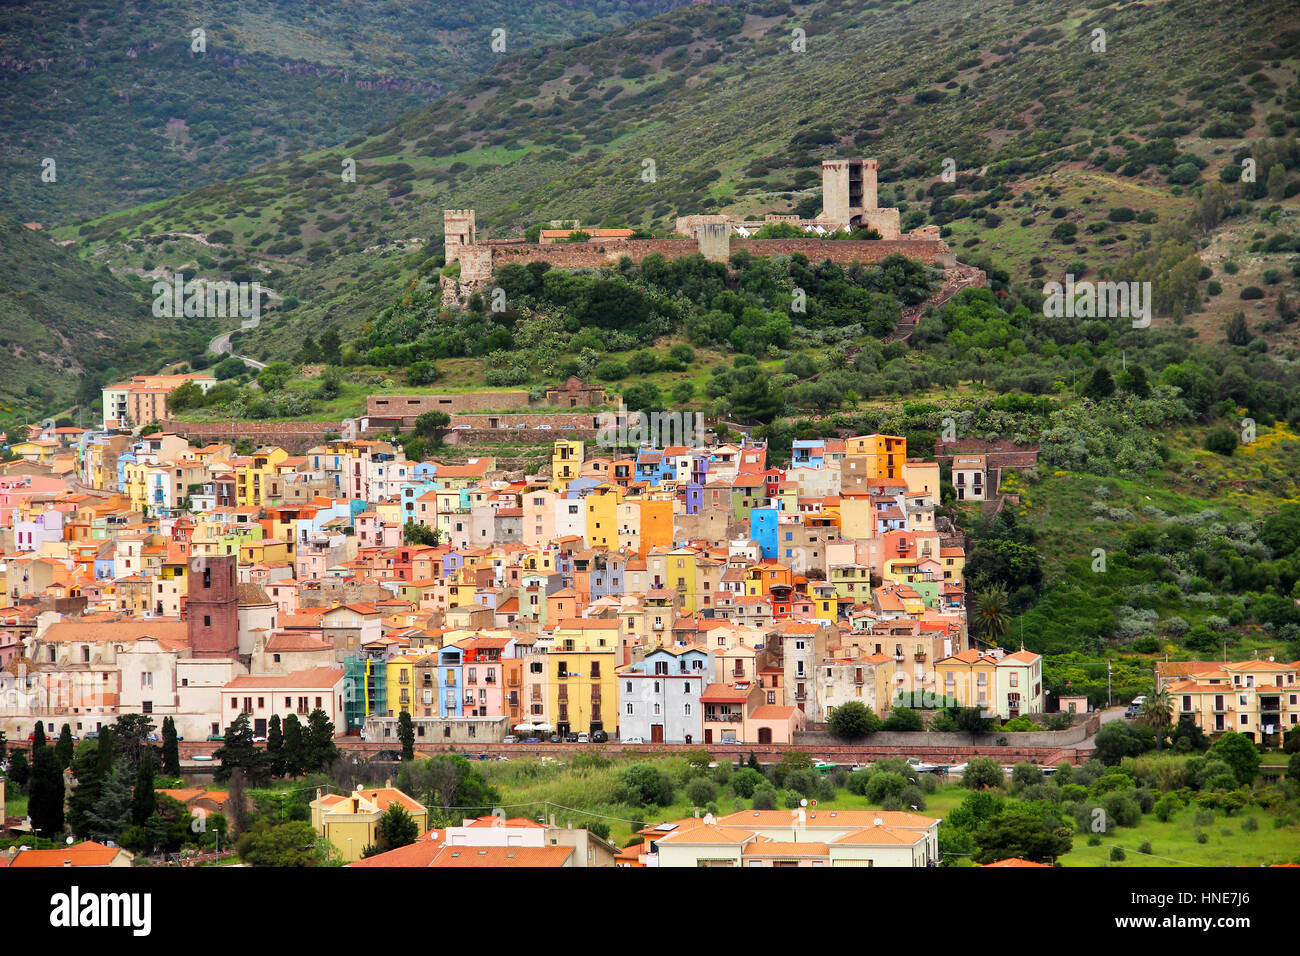 Bosa town with colorful houses and Serravalle's Castle, Oristano province, Sardinia, Italy Stock Photo